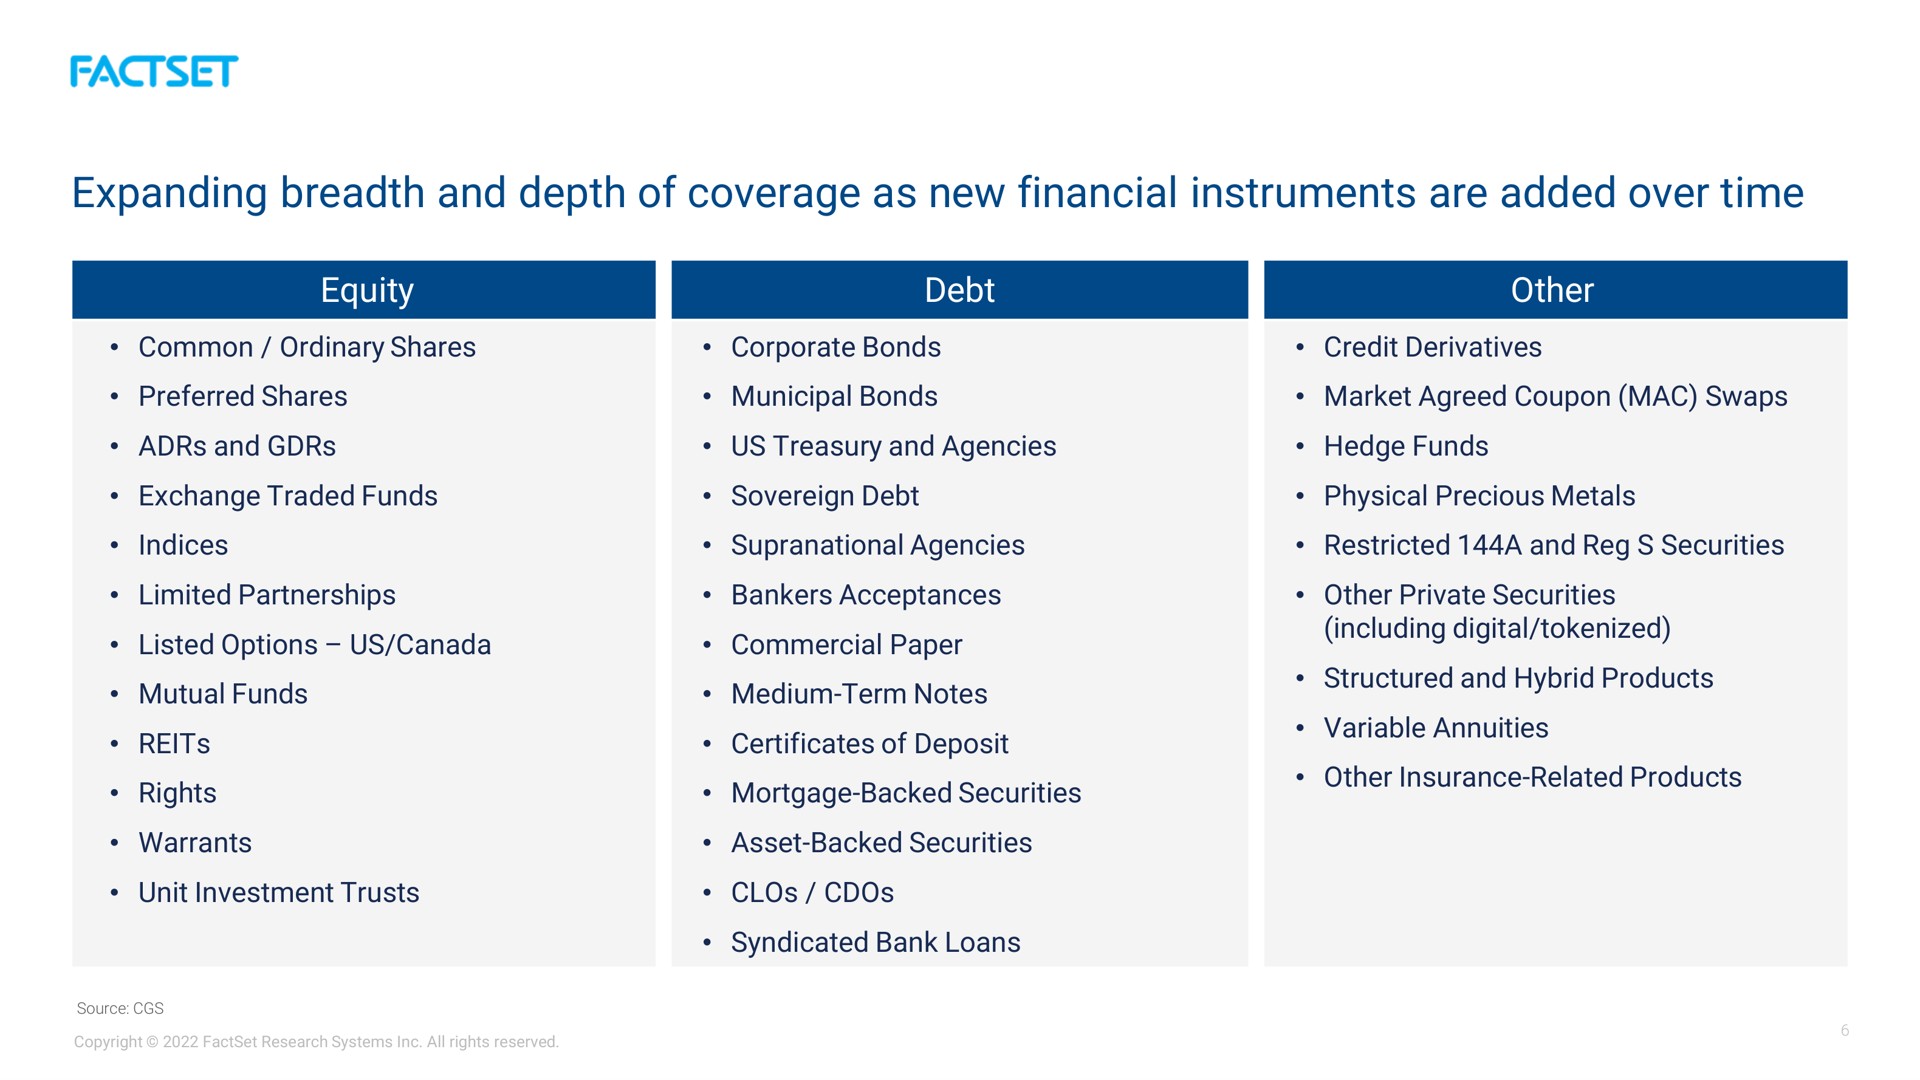 expanding breadth and depth of coverage as new financial instruments are added over time | Factset